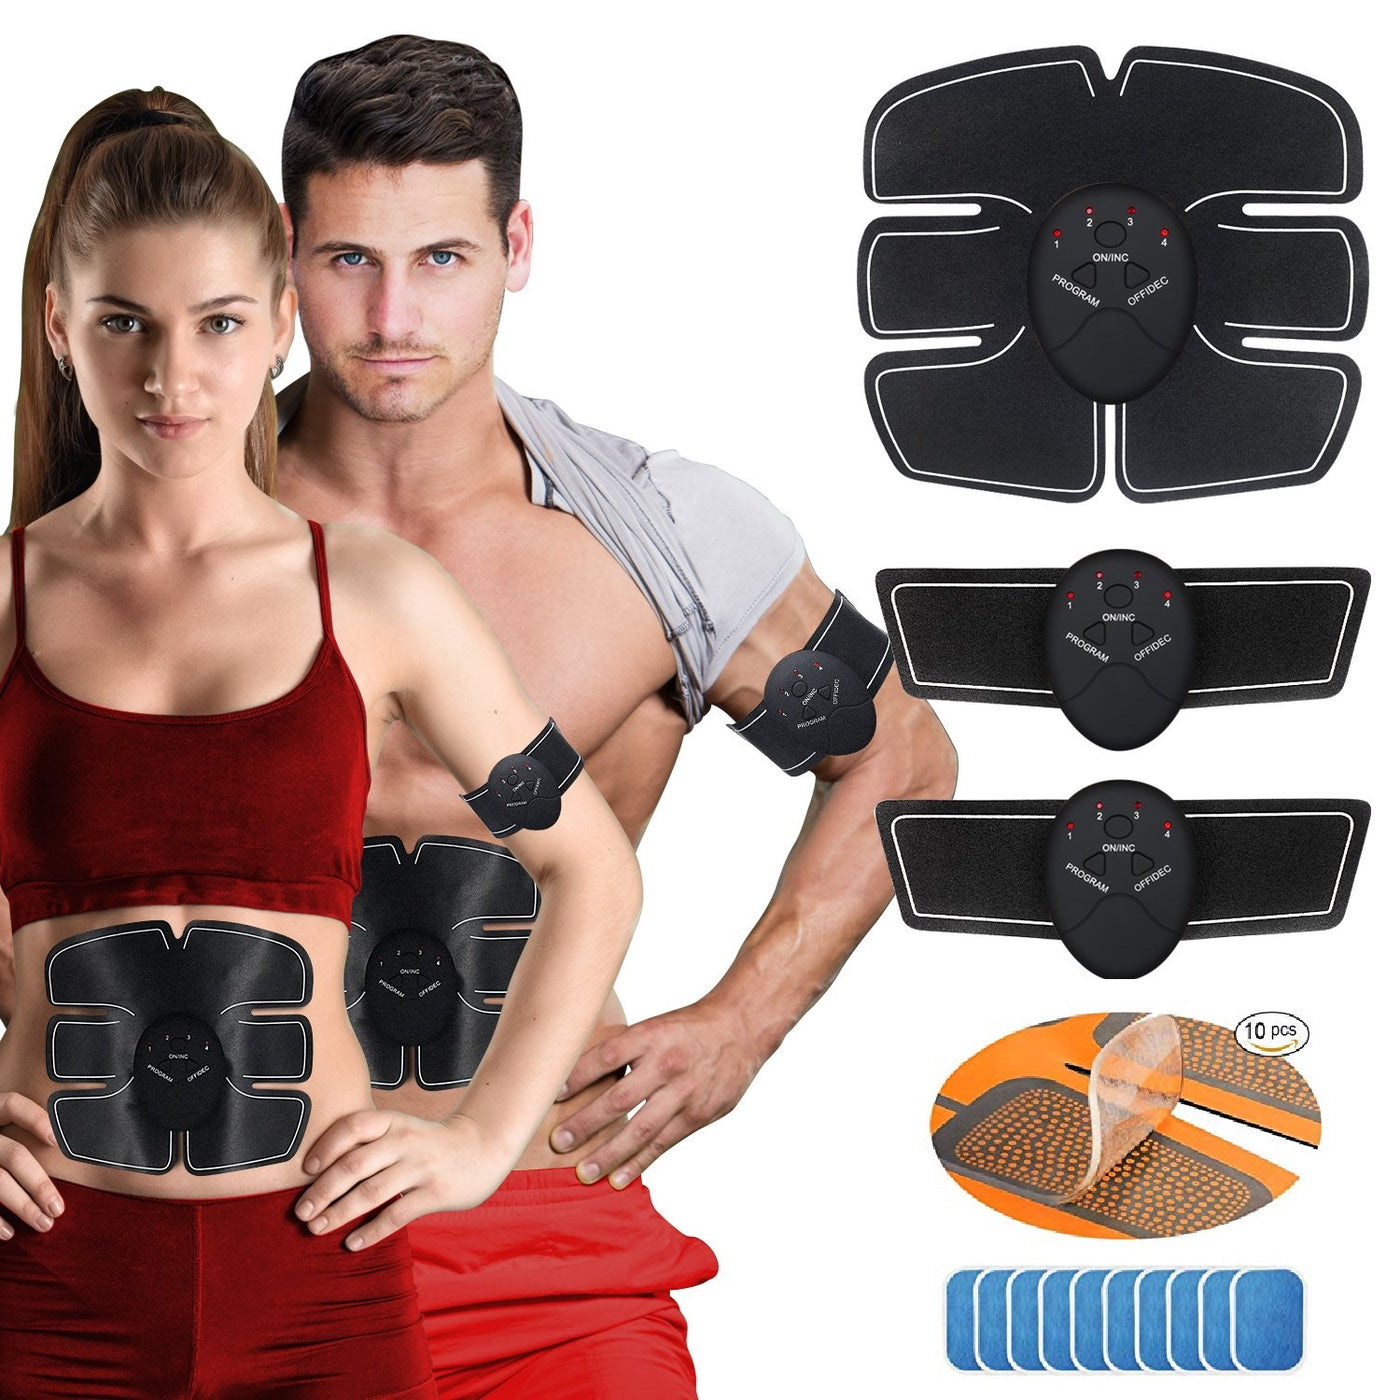 Ultimate Arm Stimulator – The Exceptional Store